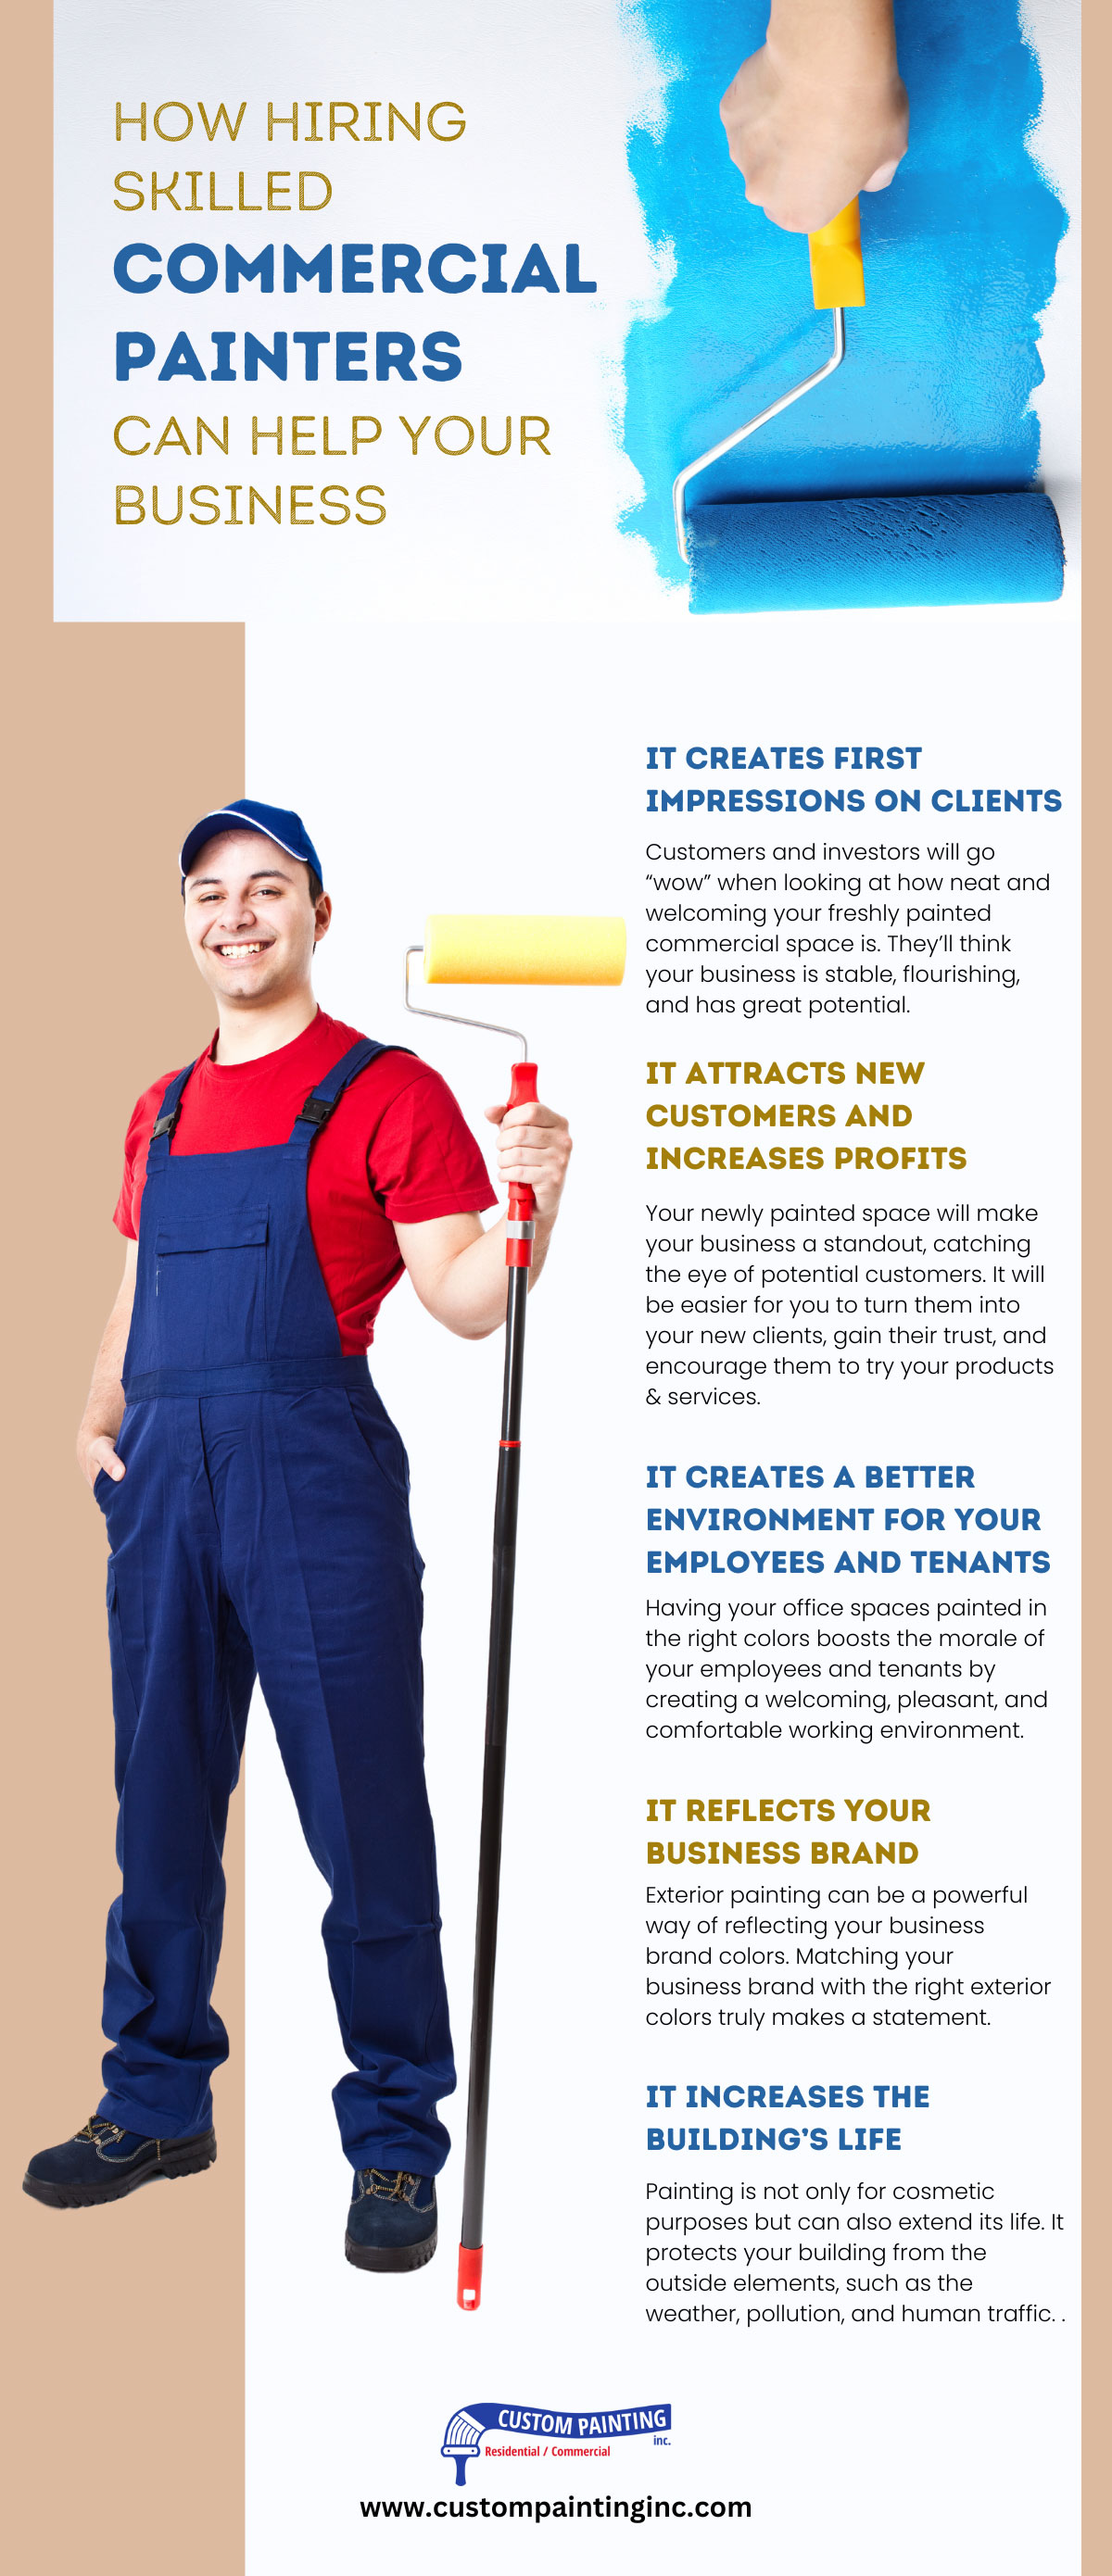 How hiring skilled commercial painters can help your business